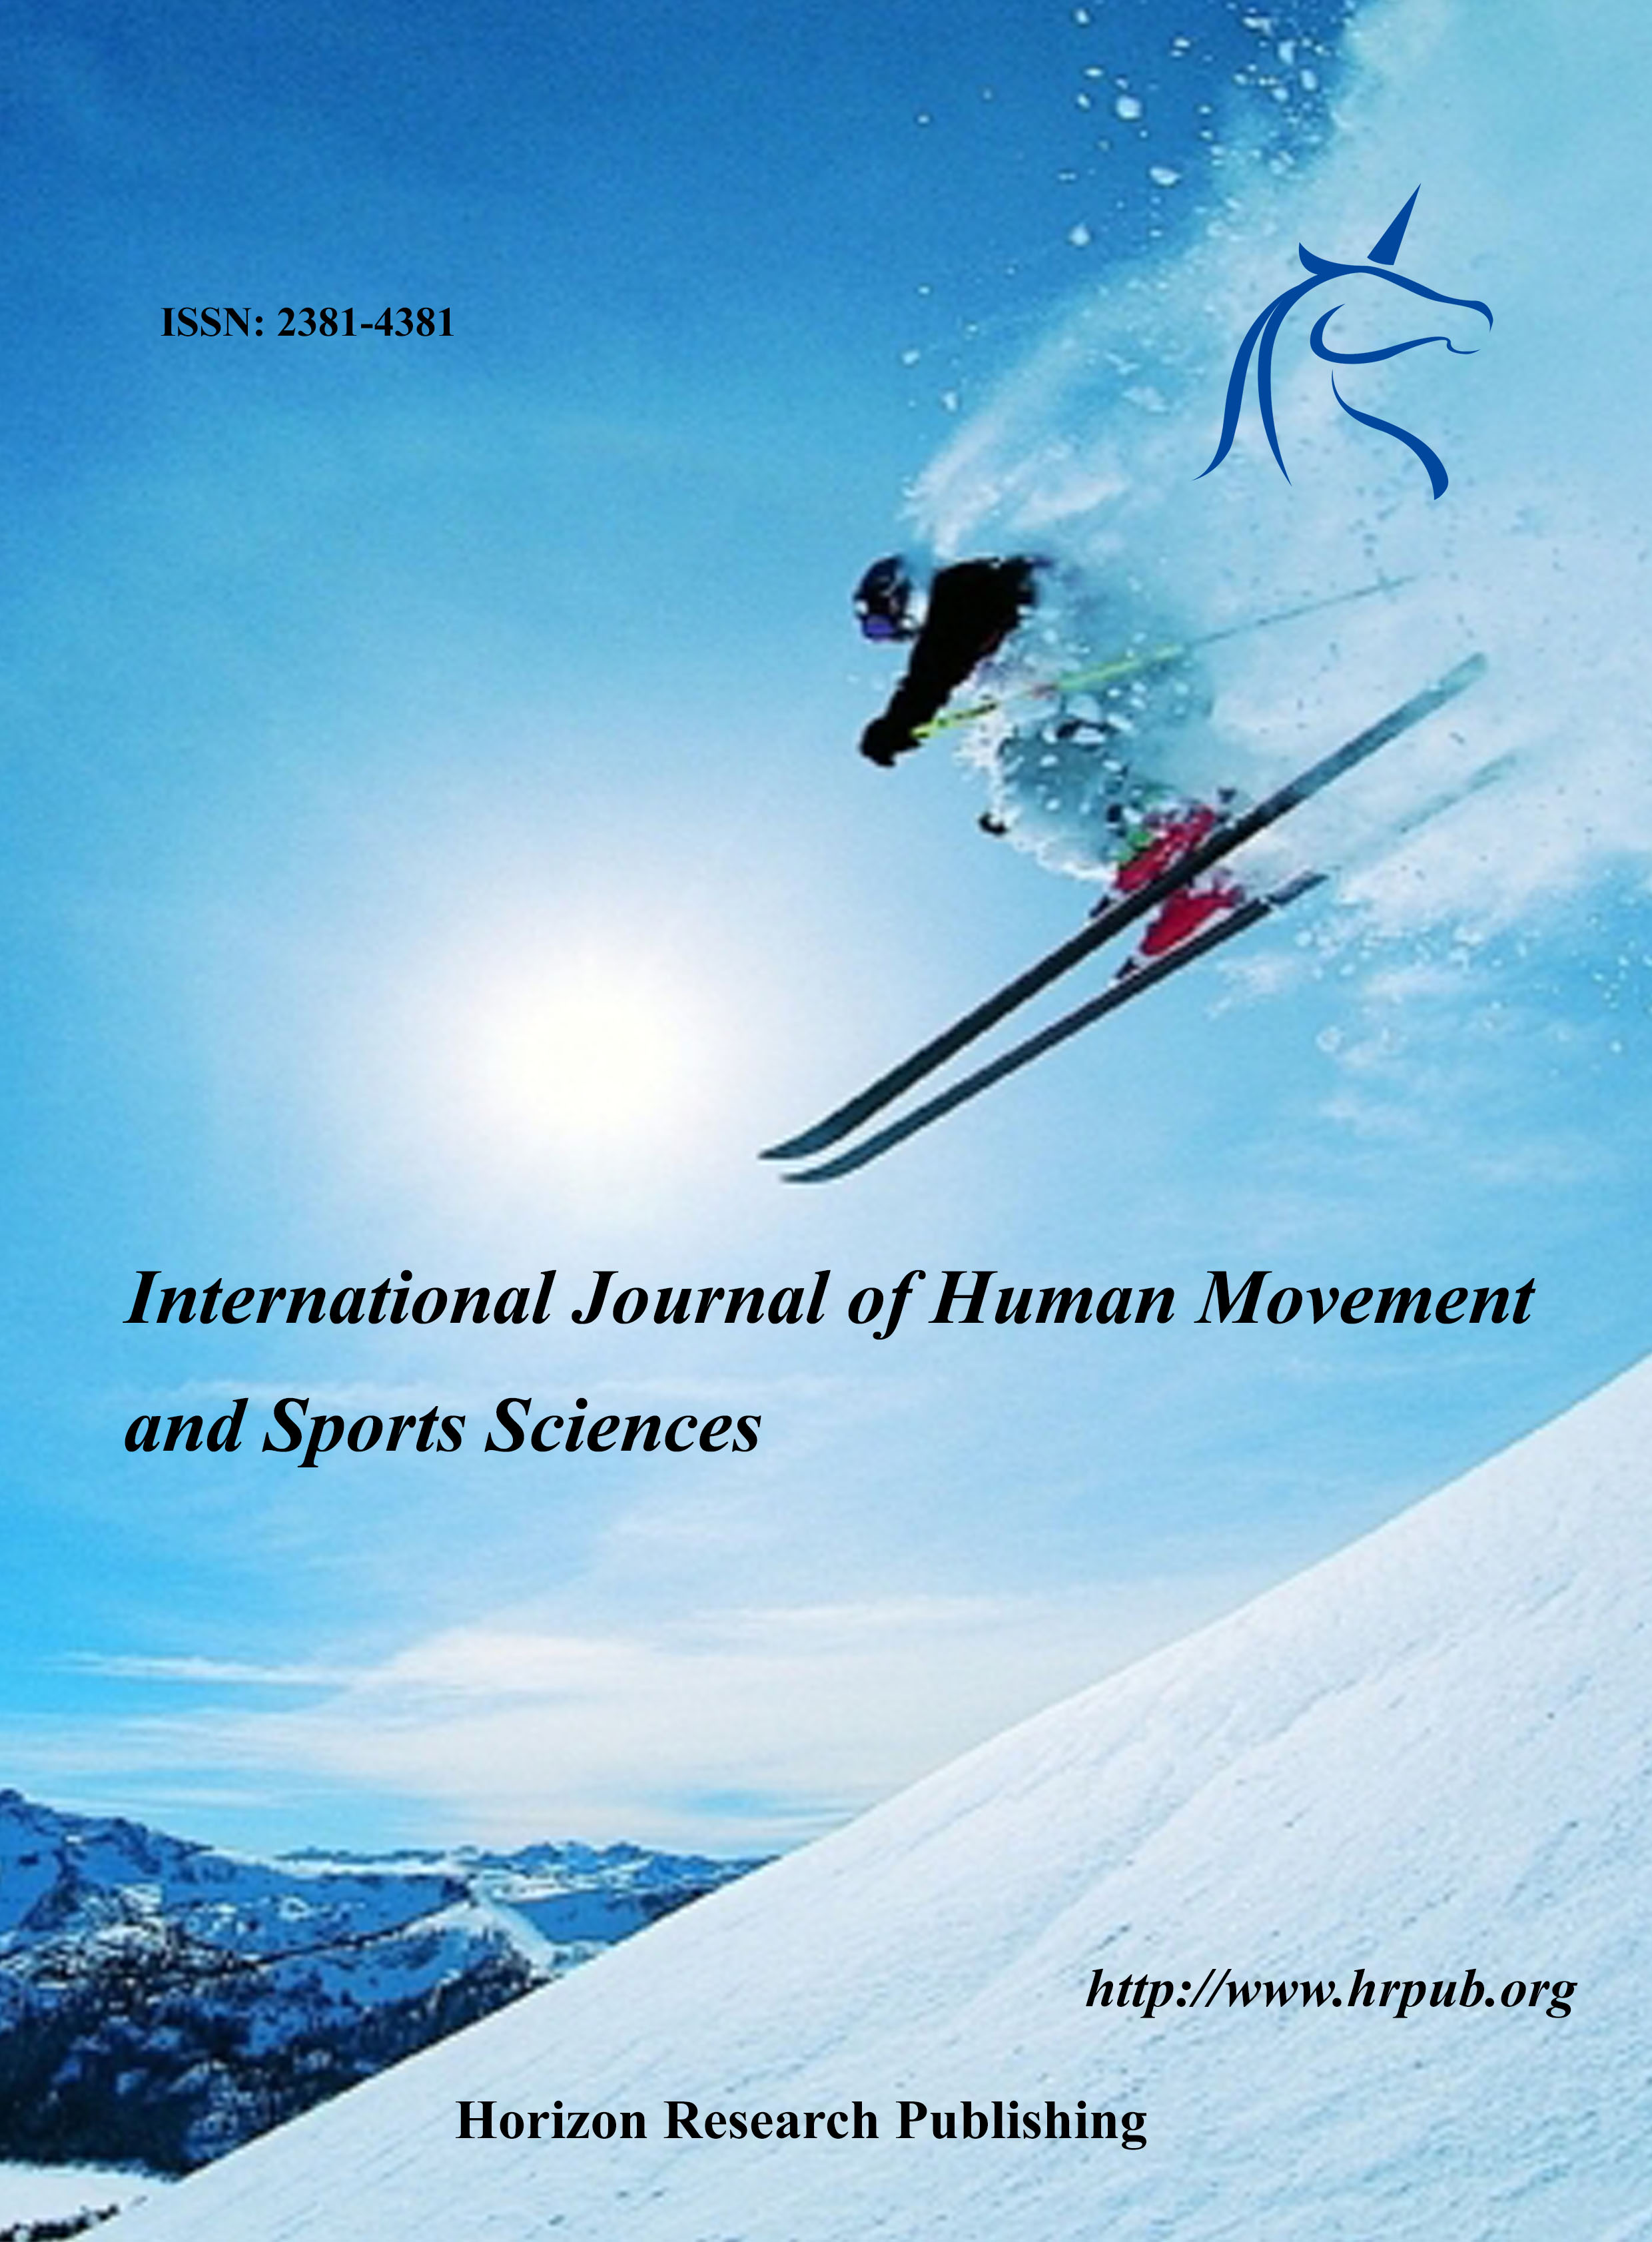 International Journal of Human Movement and Sports Sciences